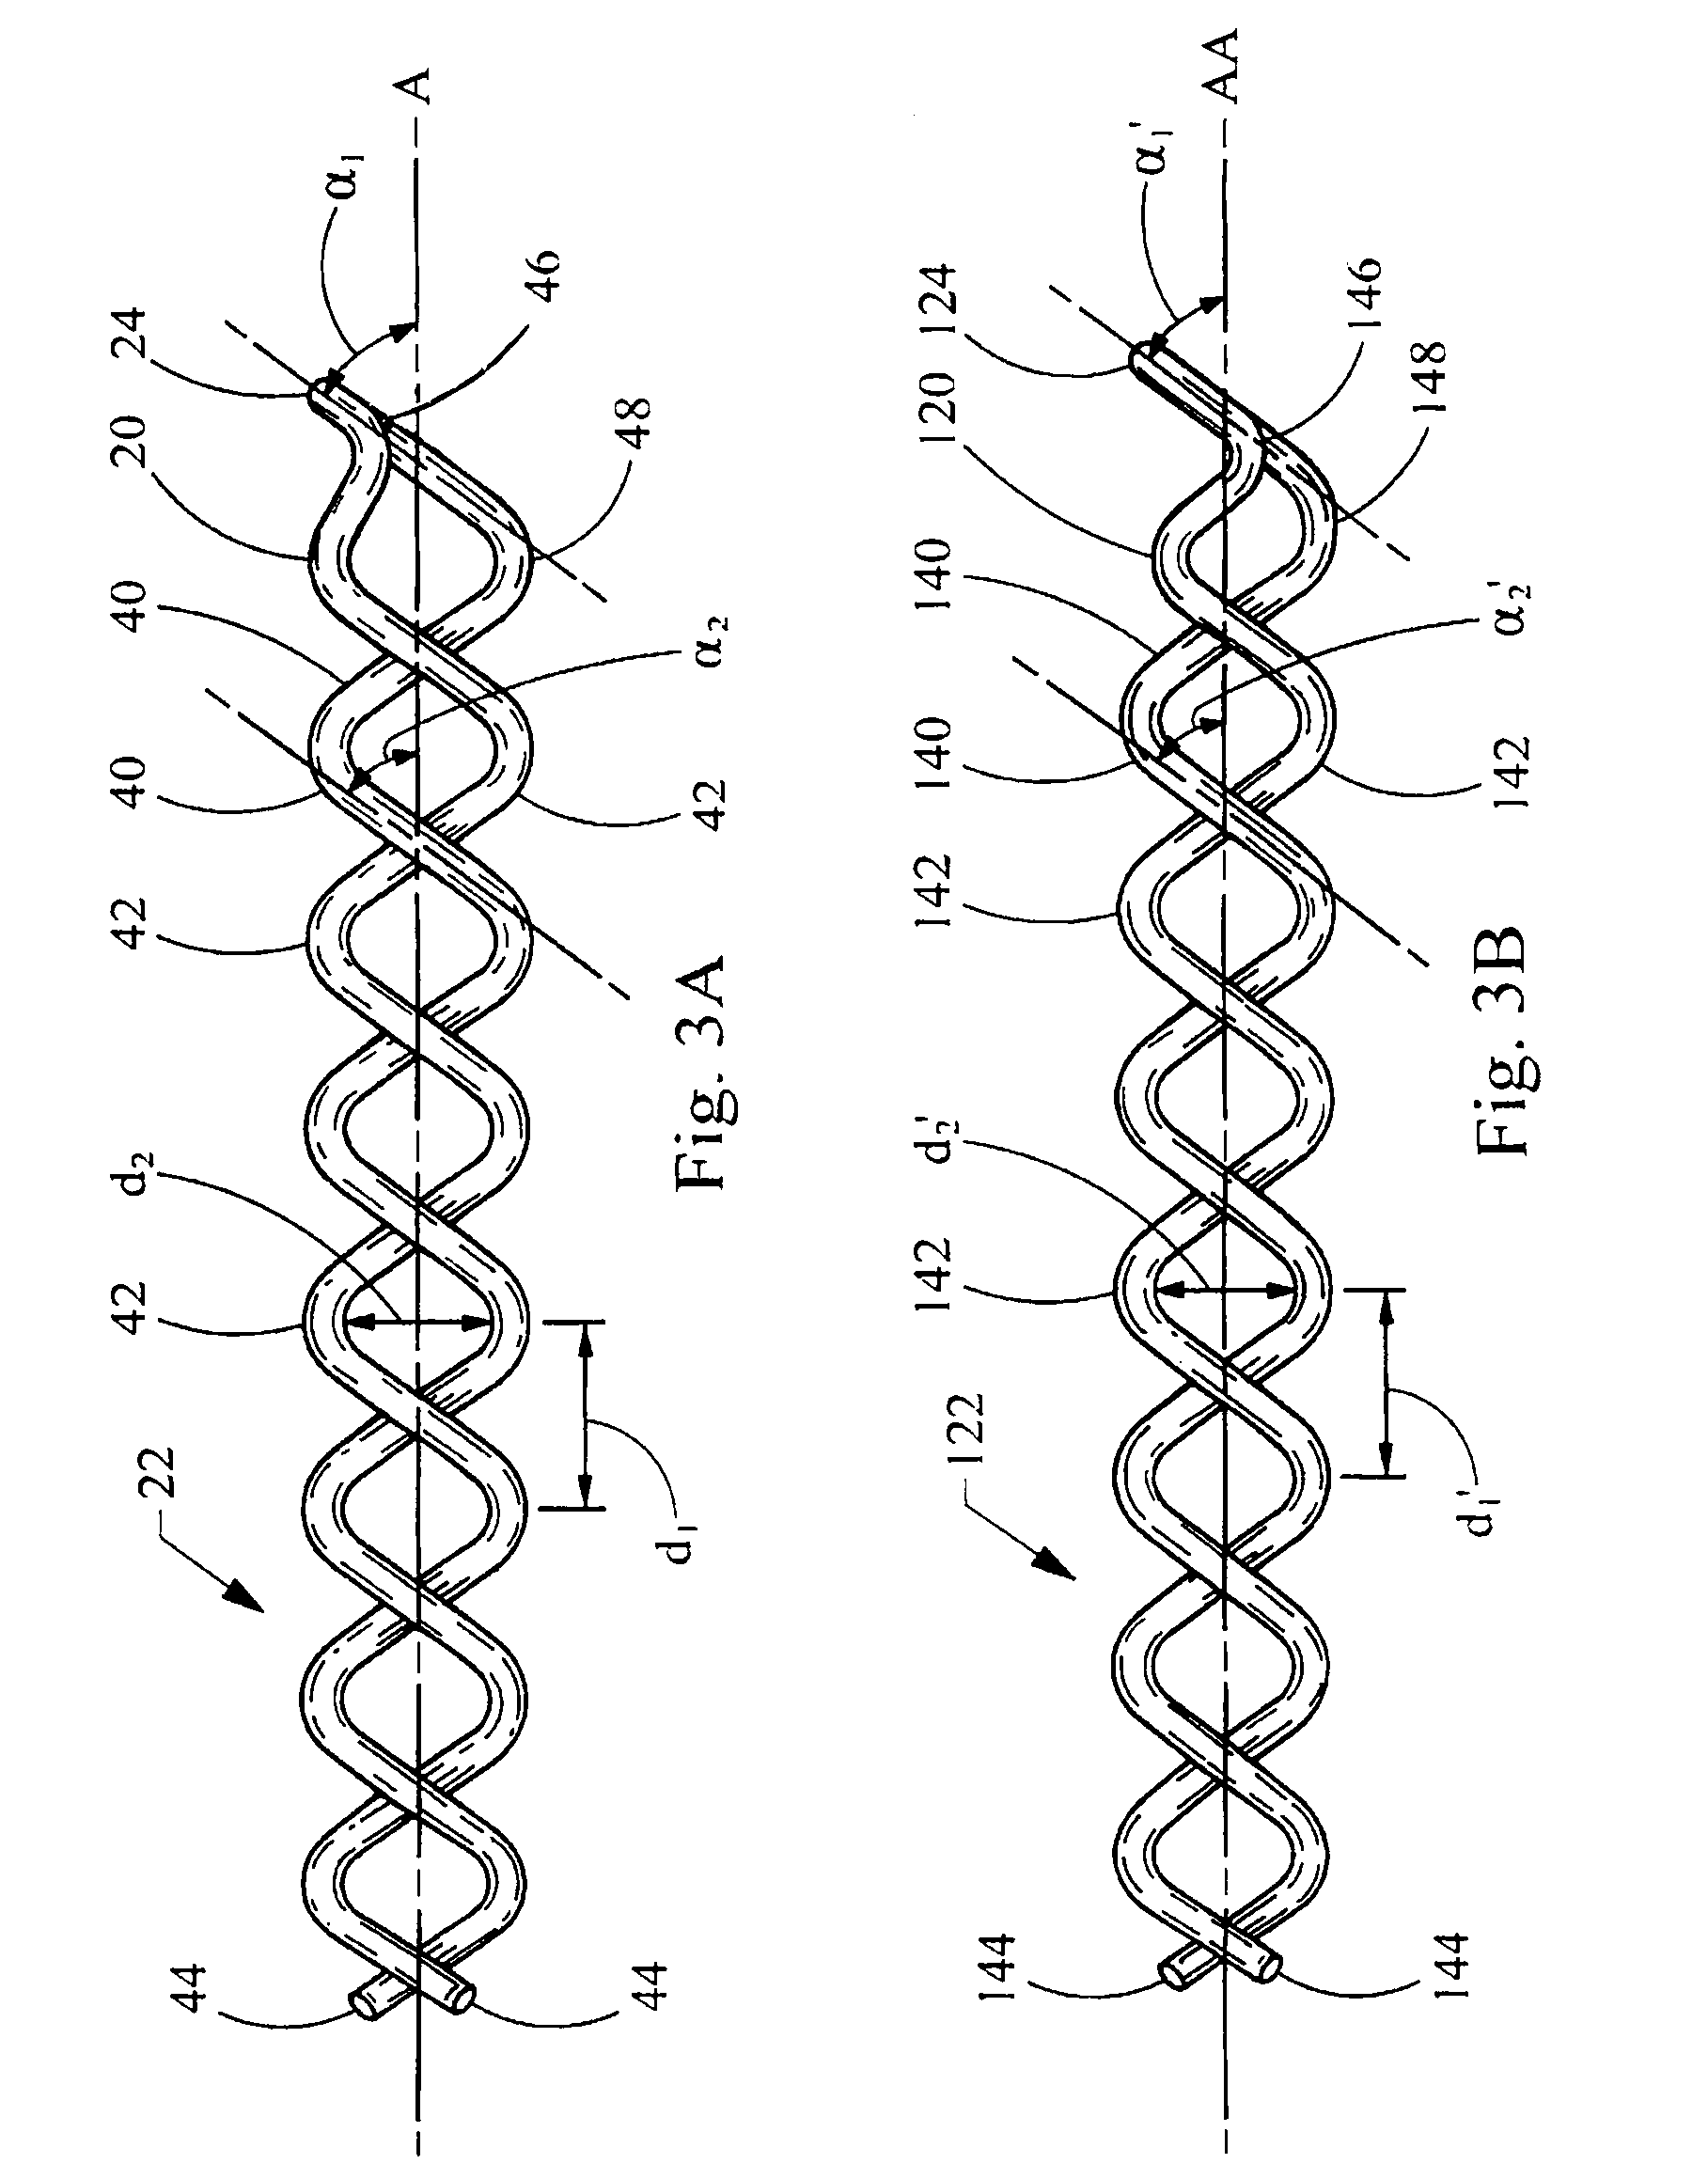 Thrombus removal device